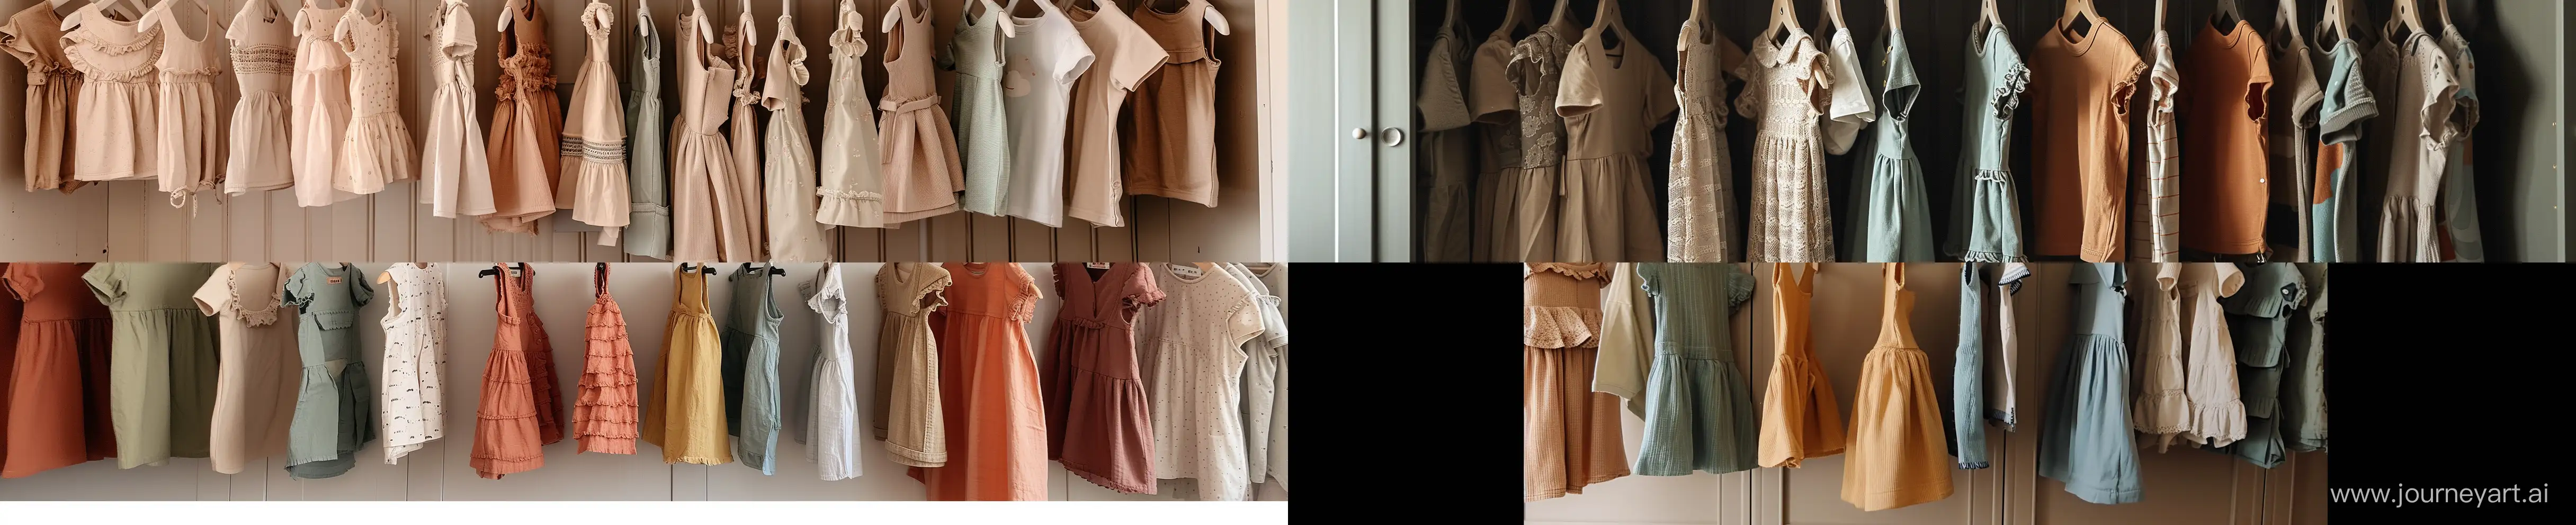 children's clothes hung on hangers in the closet, only the inside of the closet is visible in full width with girls' dresses and boys' short-sleeved tricot sets, earthy color, --aspect 44:9